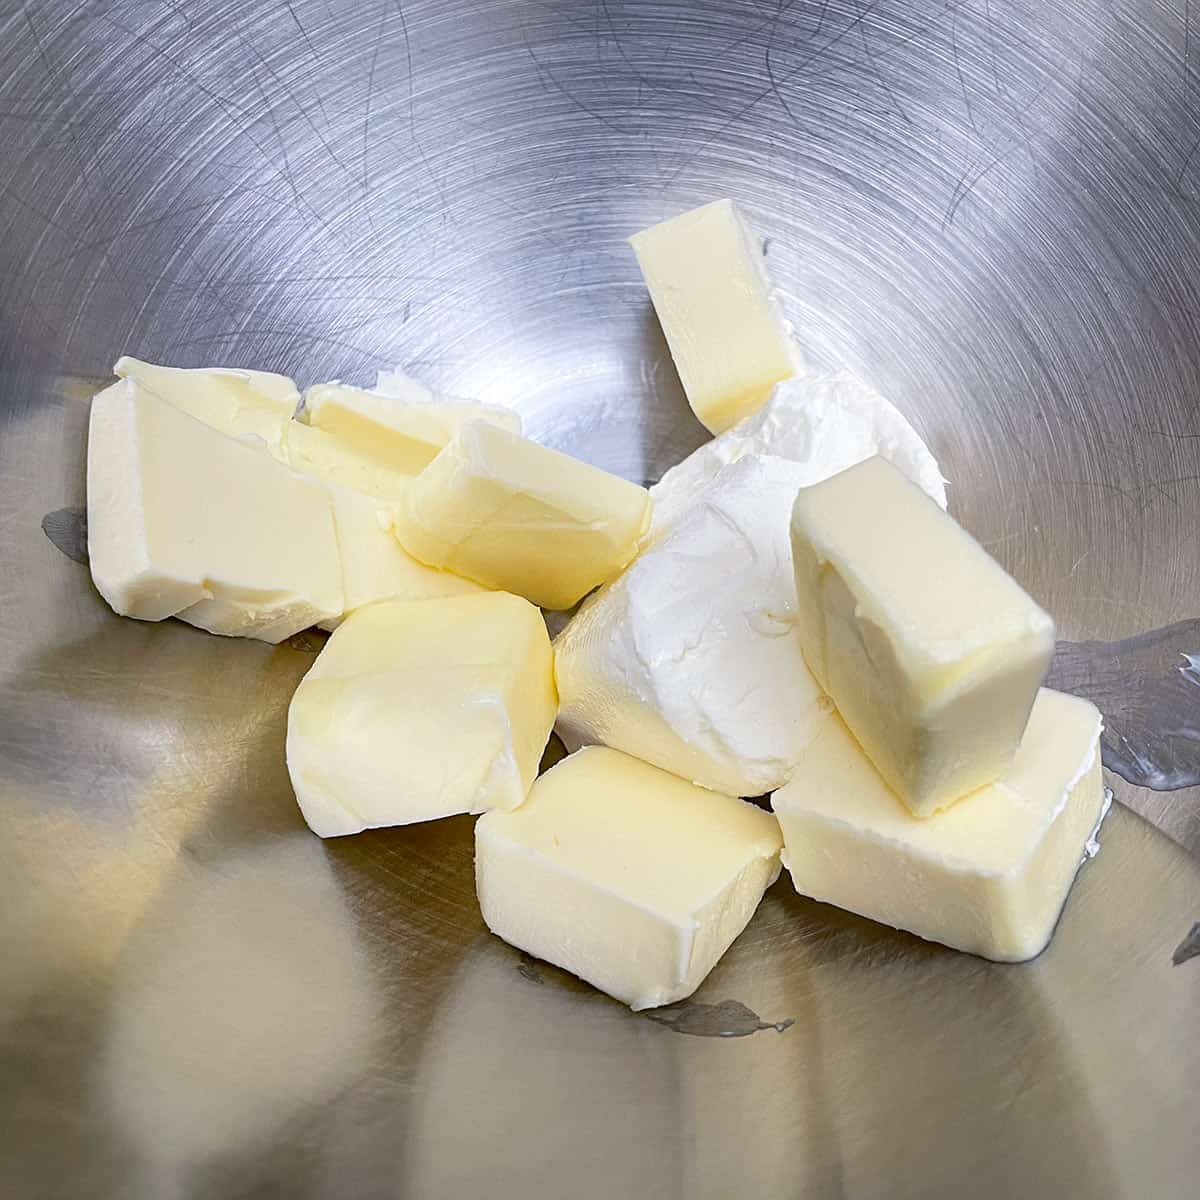 Cubed butter and a small block of cream cheese in the mixer bowl ready to be mixed.